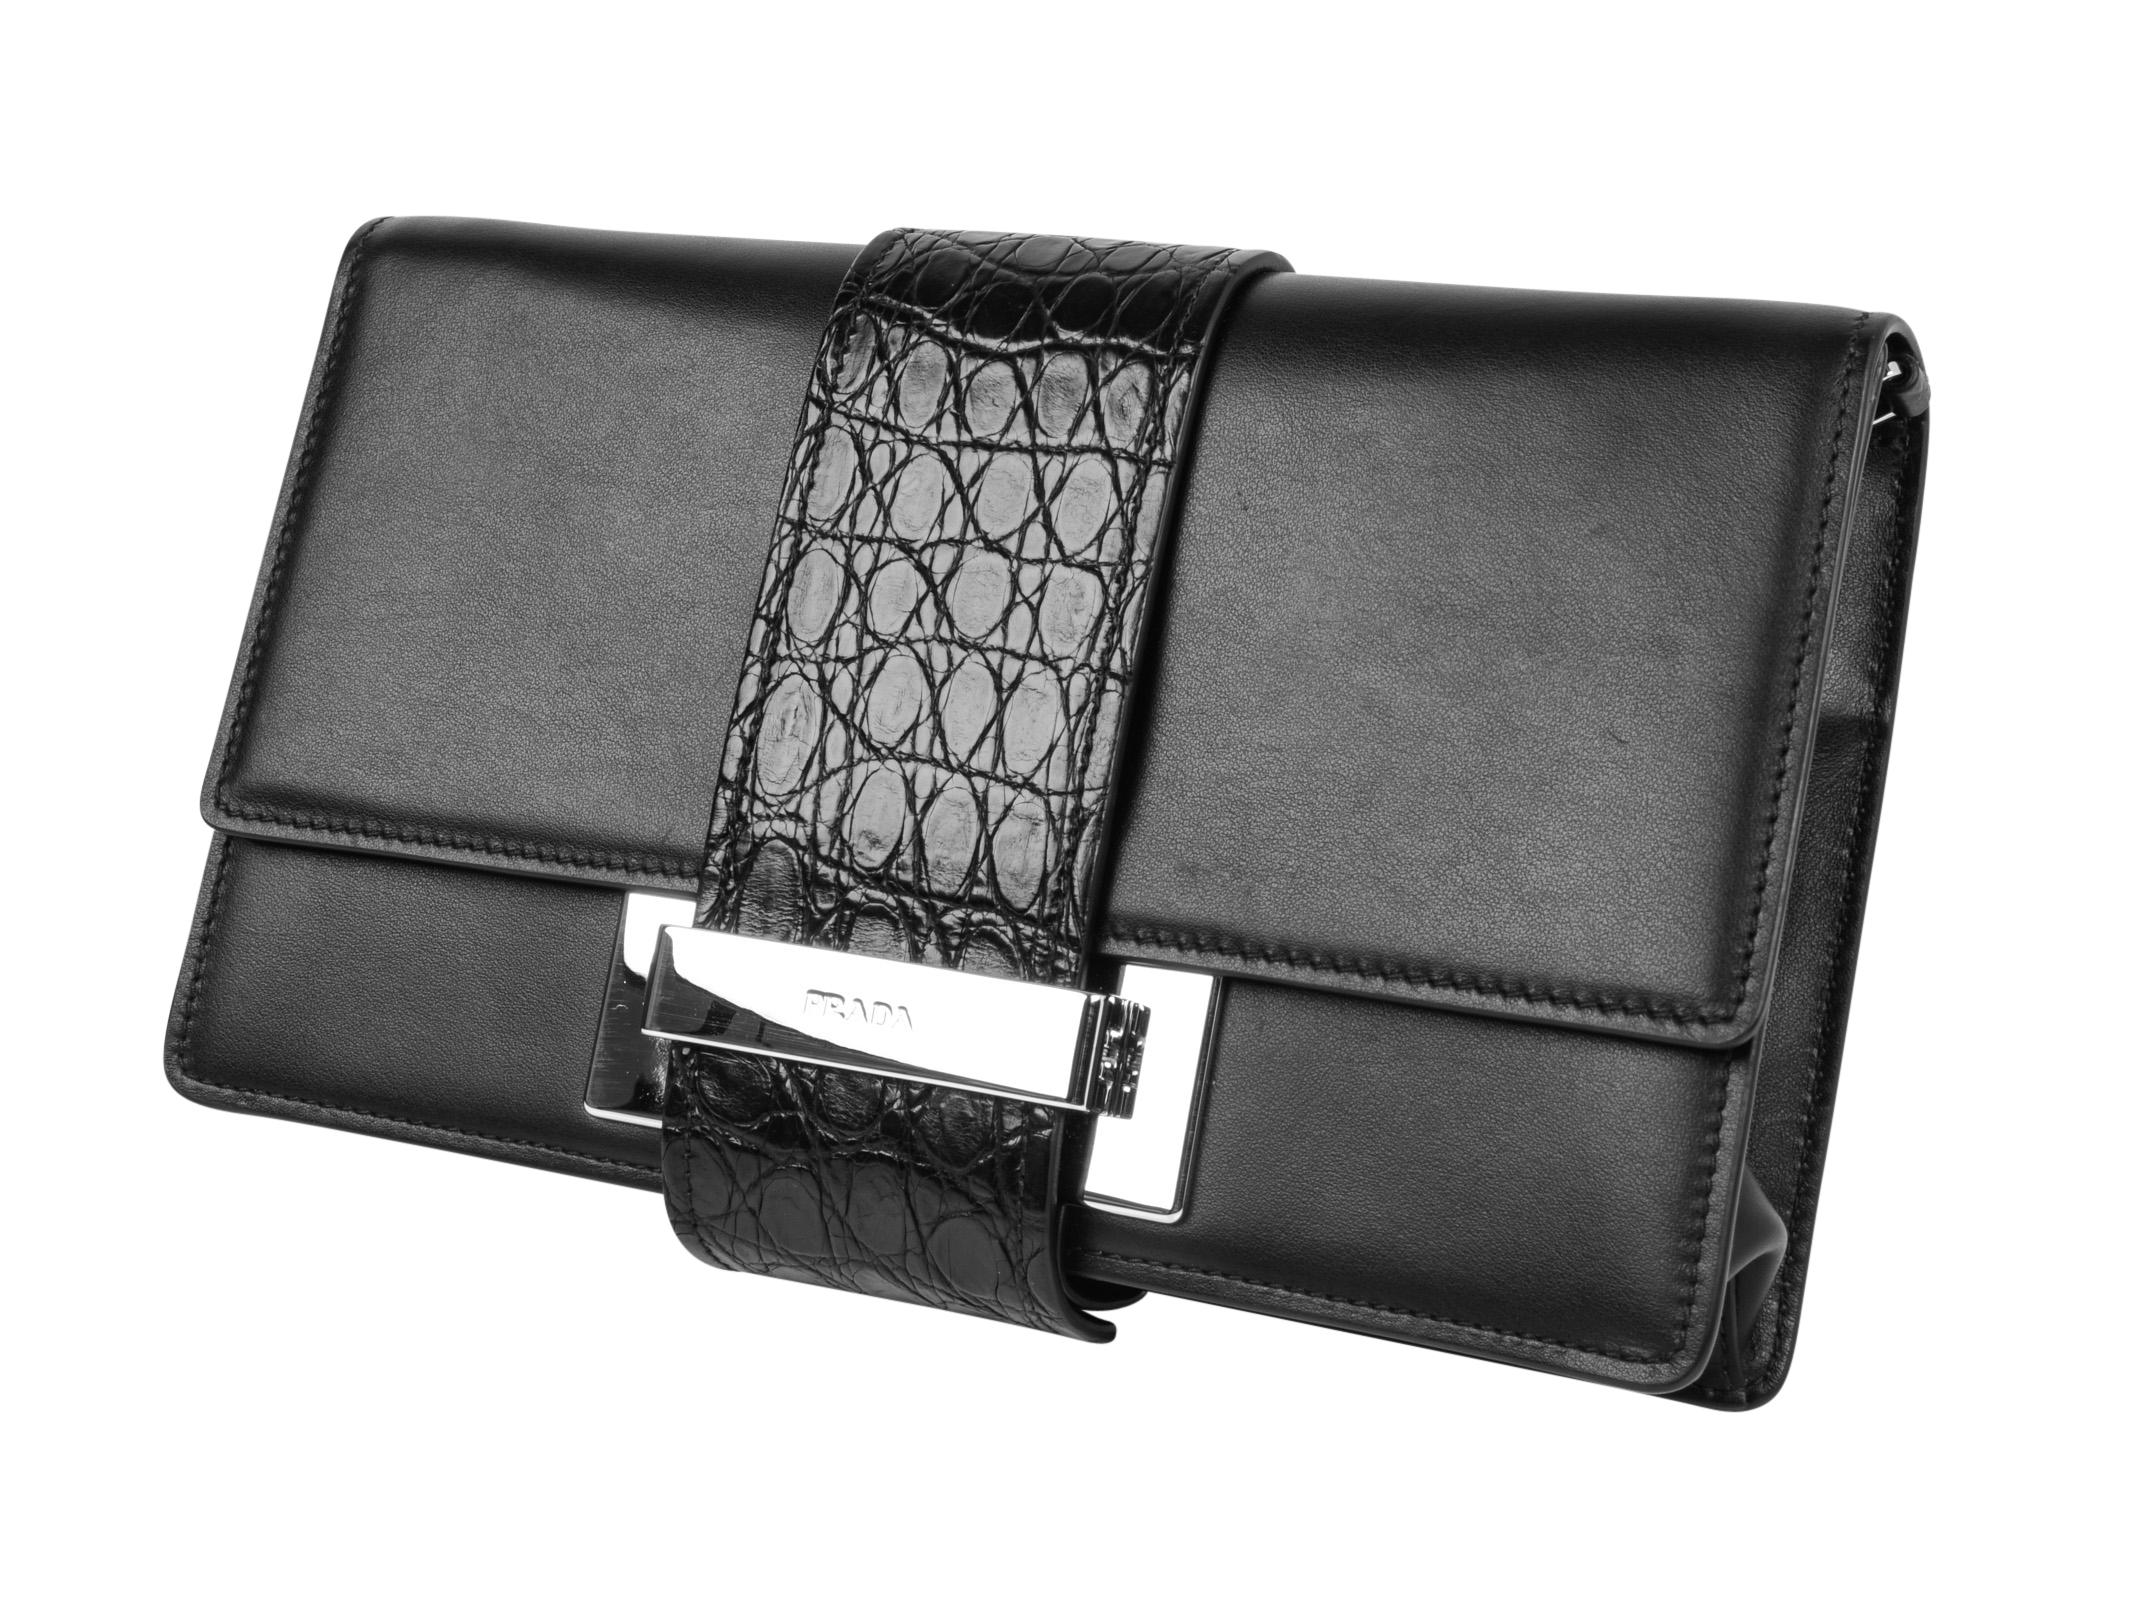 Guaranteed authentic Prada black Plex Ribbon leather clutch with front crocodile strap and silver hardware.
Elegant and versatile with leather strap to convert to shoulder bag.
Front snaps closed to secure black crocodile strap under embossed silver